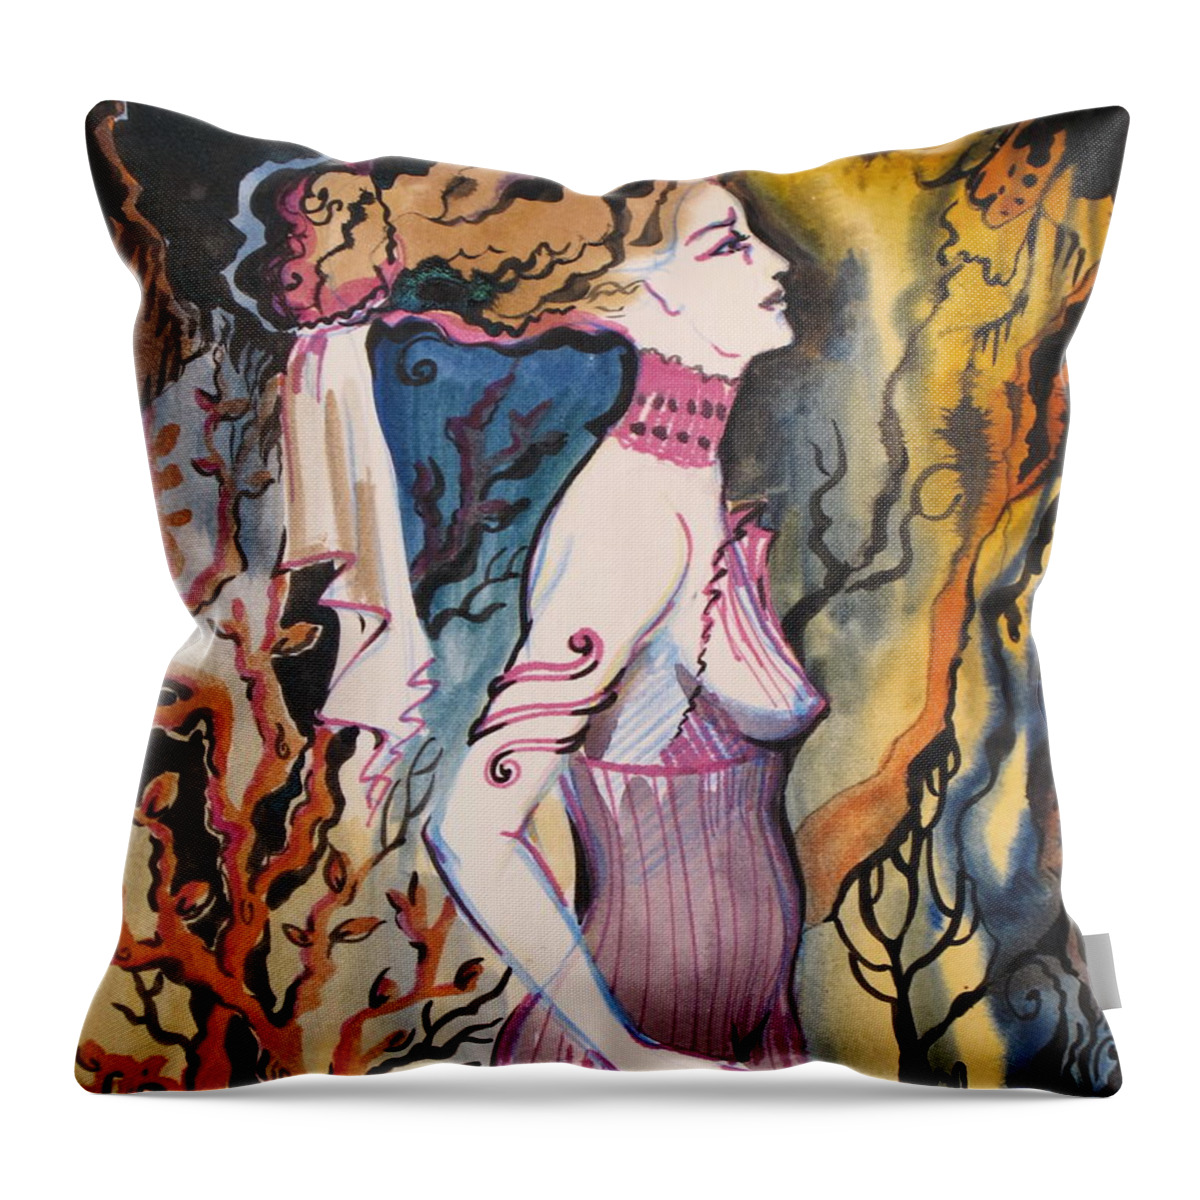 Woman Throw Pillow featuring the painting Many centuries ago by Valentina Plishchina